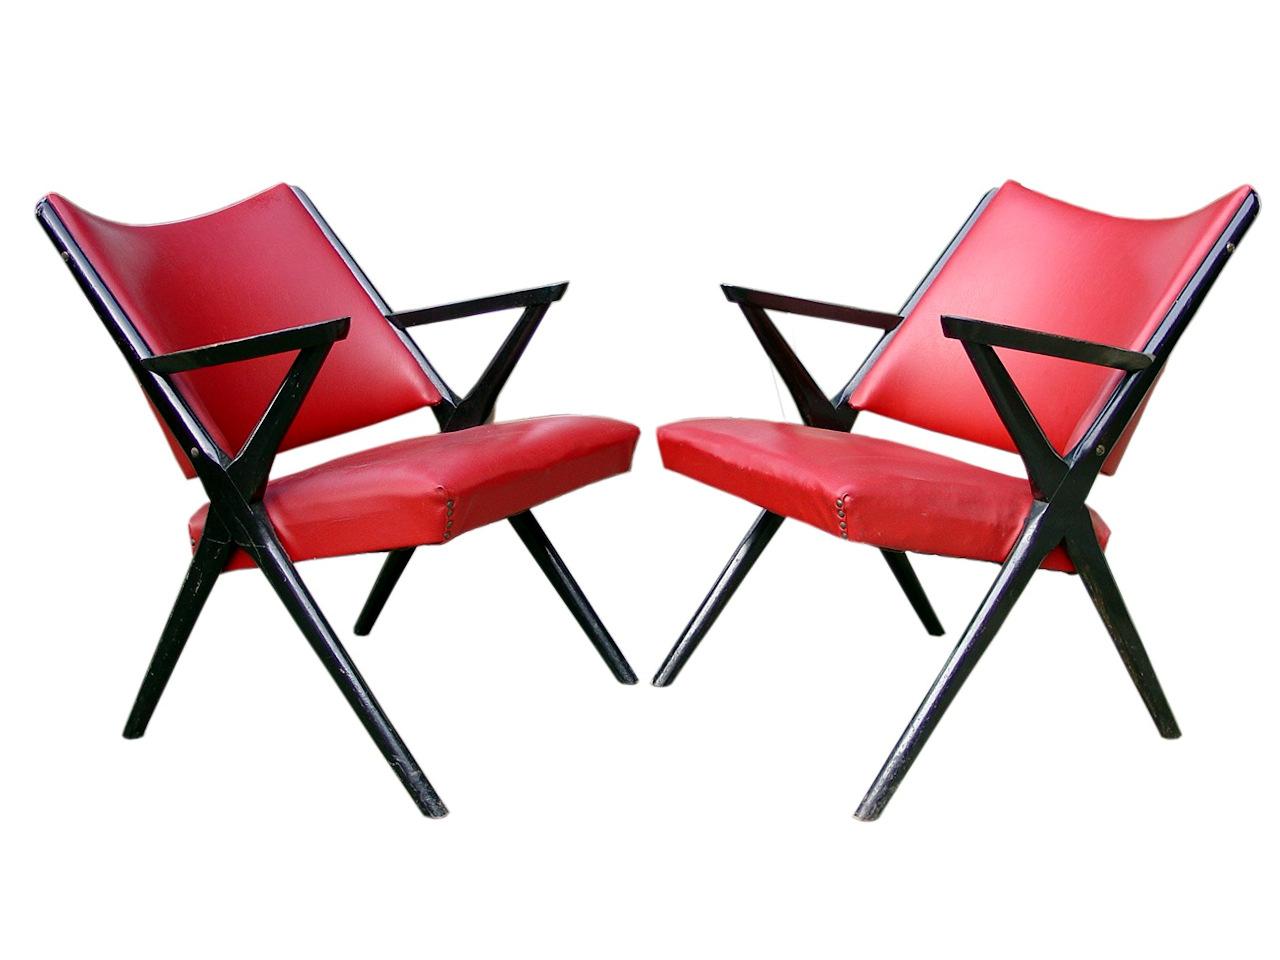 Dal Vera design Italy set of two arm chairs years '50 midcentury

 wood lacquered black and leatherette red color,

 measure; 28 inches x 24